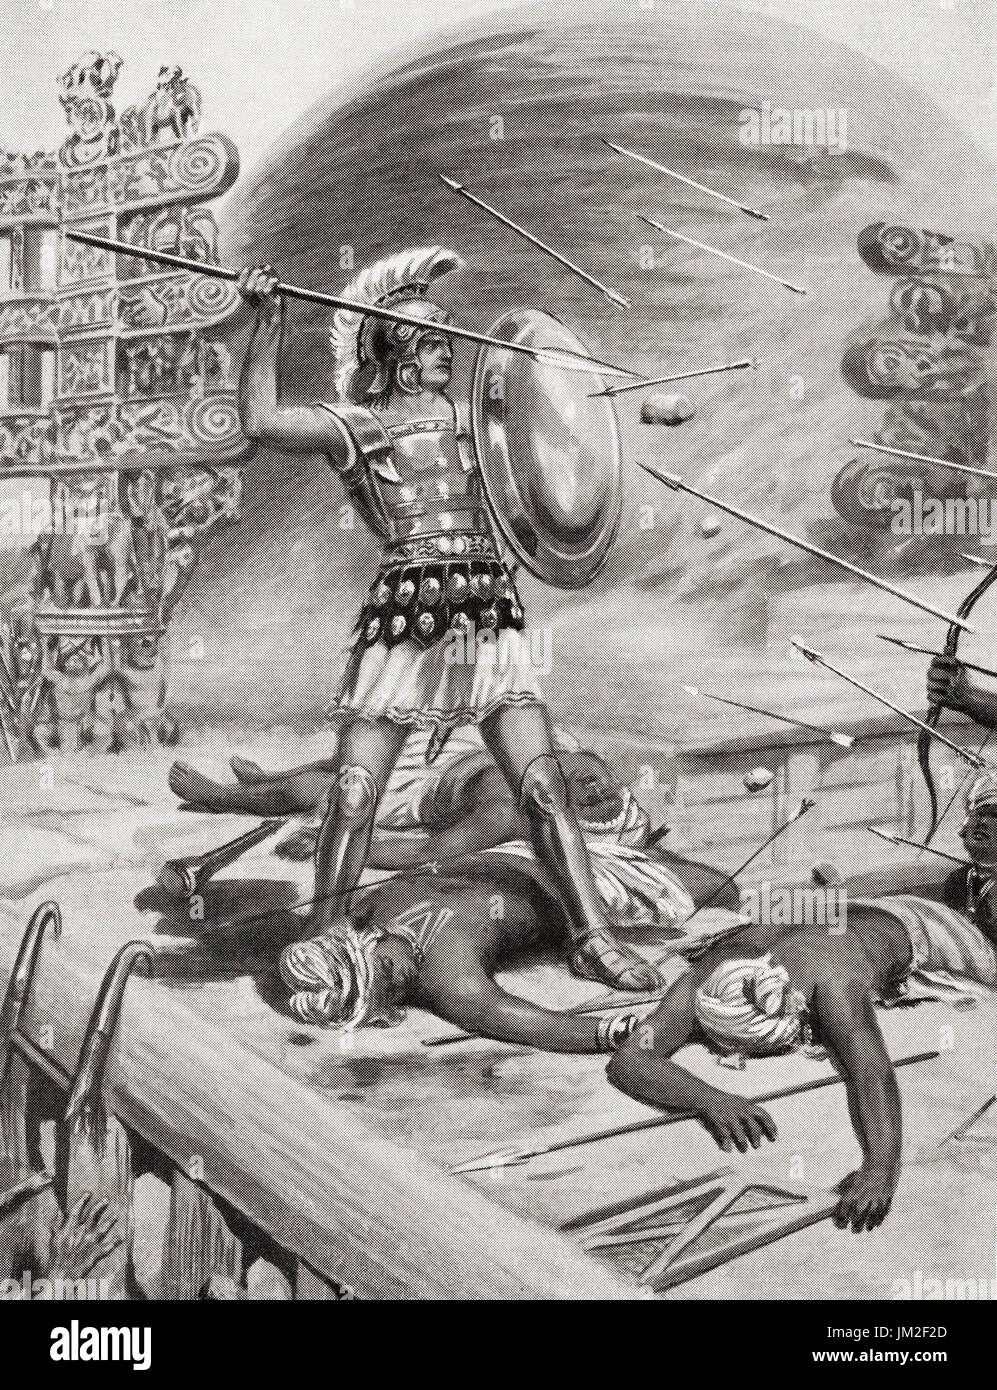 EDITORIAL Alexander the Great fighting the Assacani at the fortified city of Massaga, India during his Indian Campaign in 326BC.  Alexander III of Macedon, 356 BC – 323 BC, aka Alexander the Great.  King  of the Ancient Greek kingdom of Macedon.  After the painting by Ambrose Dudley (1867-1951).  From Hutchinson's History of the Nations, published 1915. Stock Photo